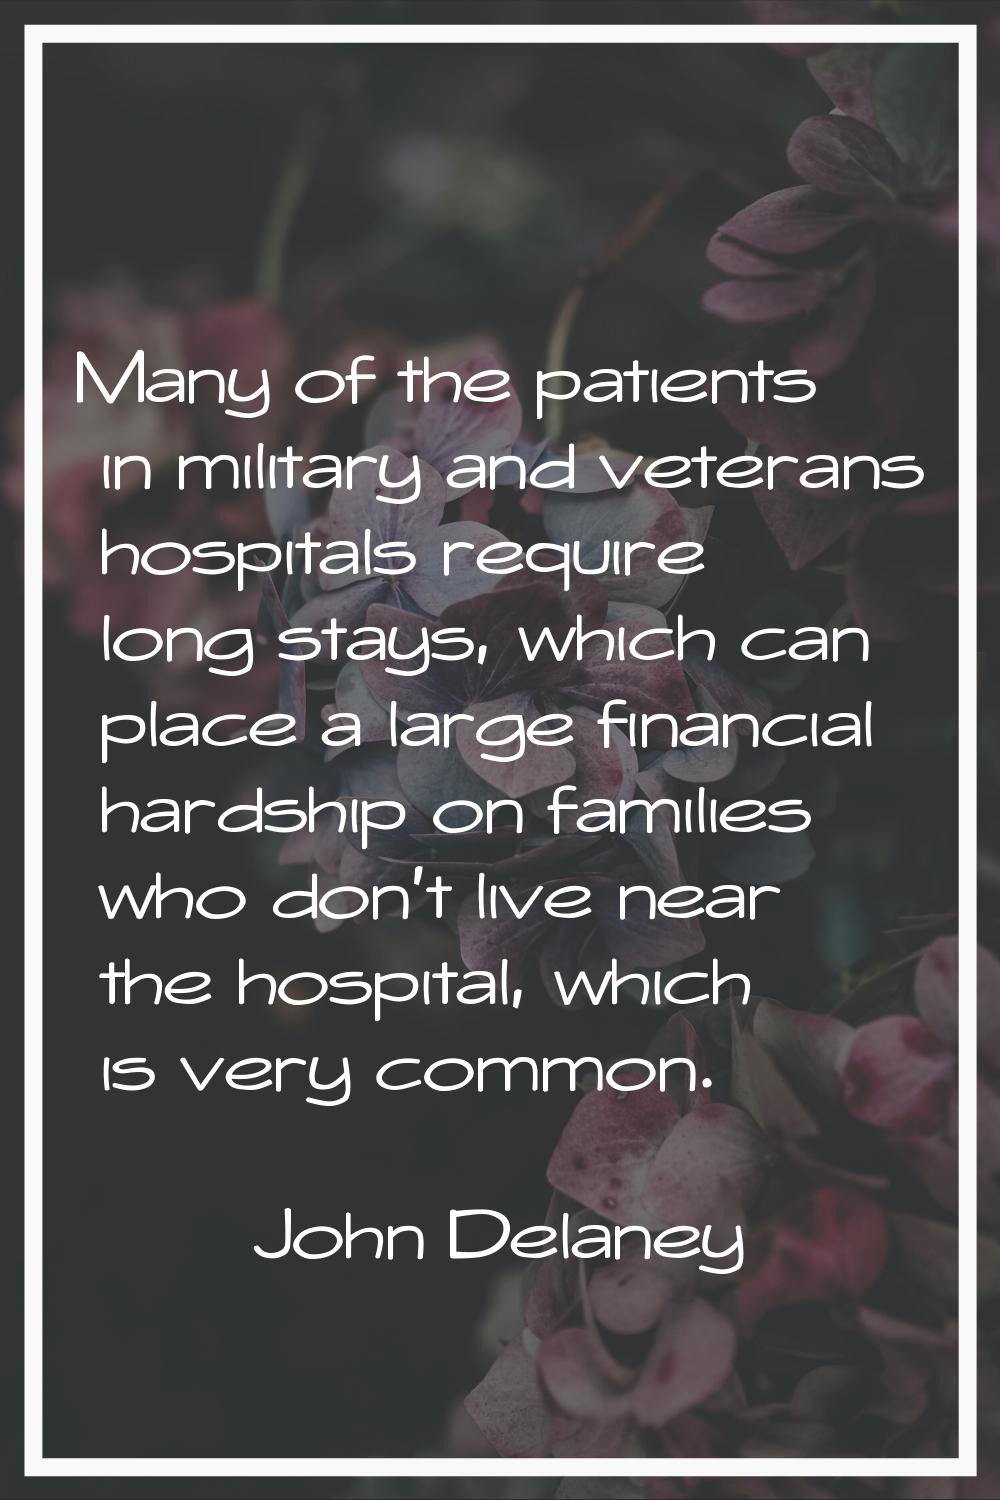 Many of the patients in military and veterans hospitals require long stays, which can place a large